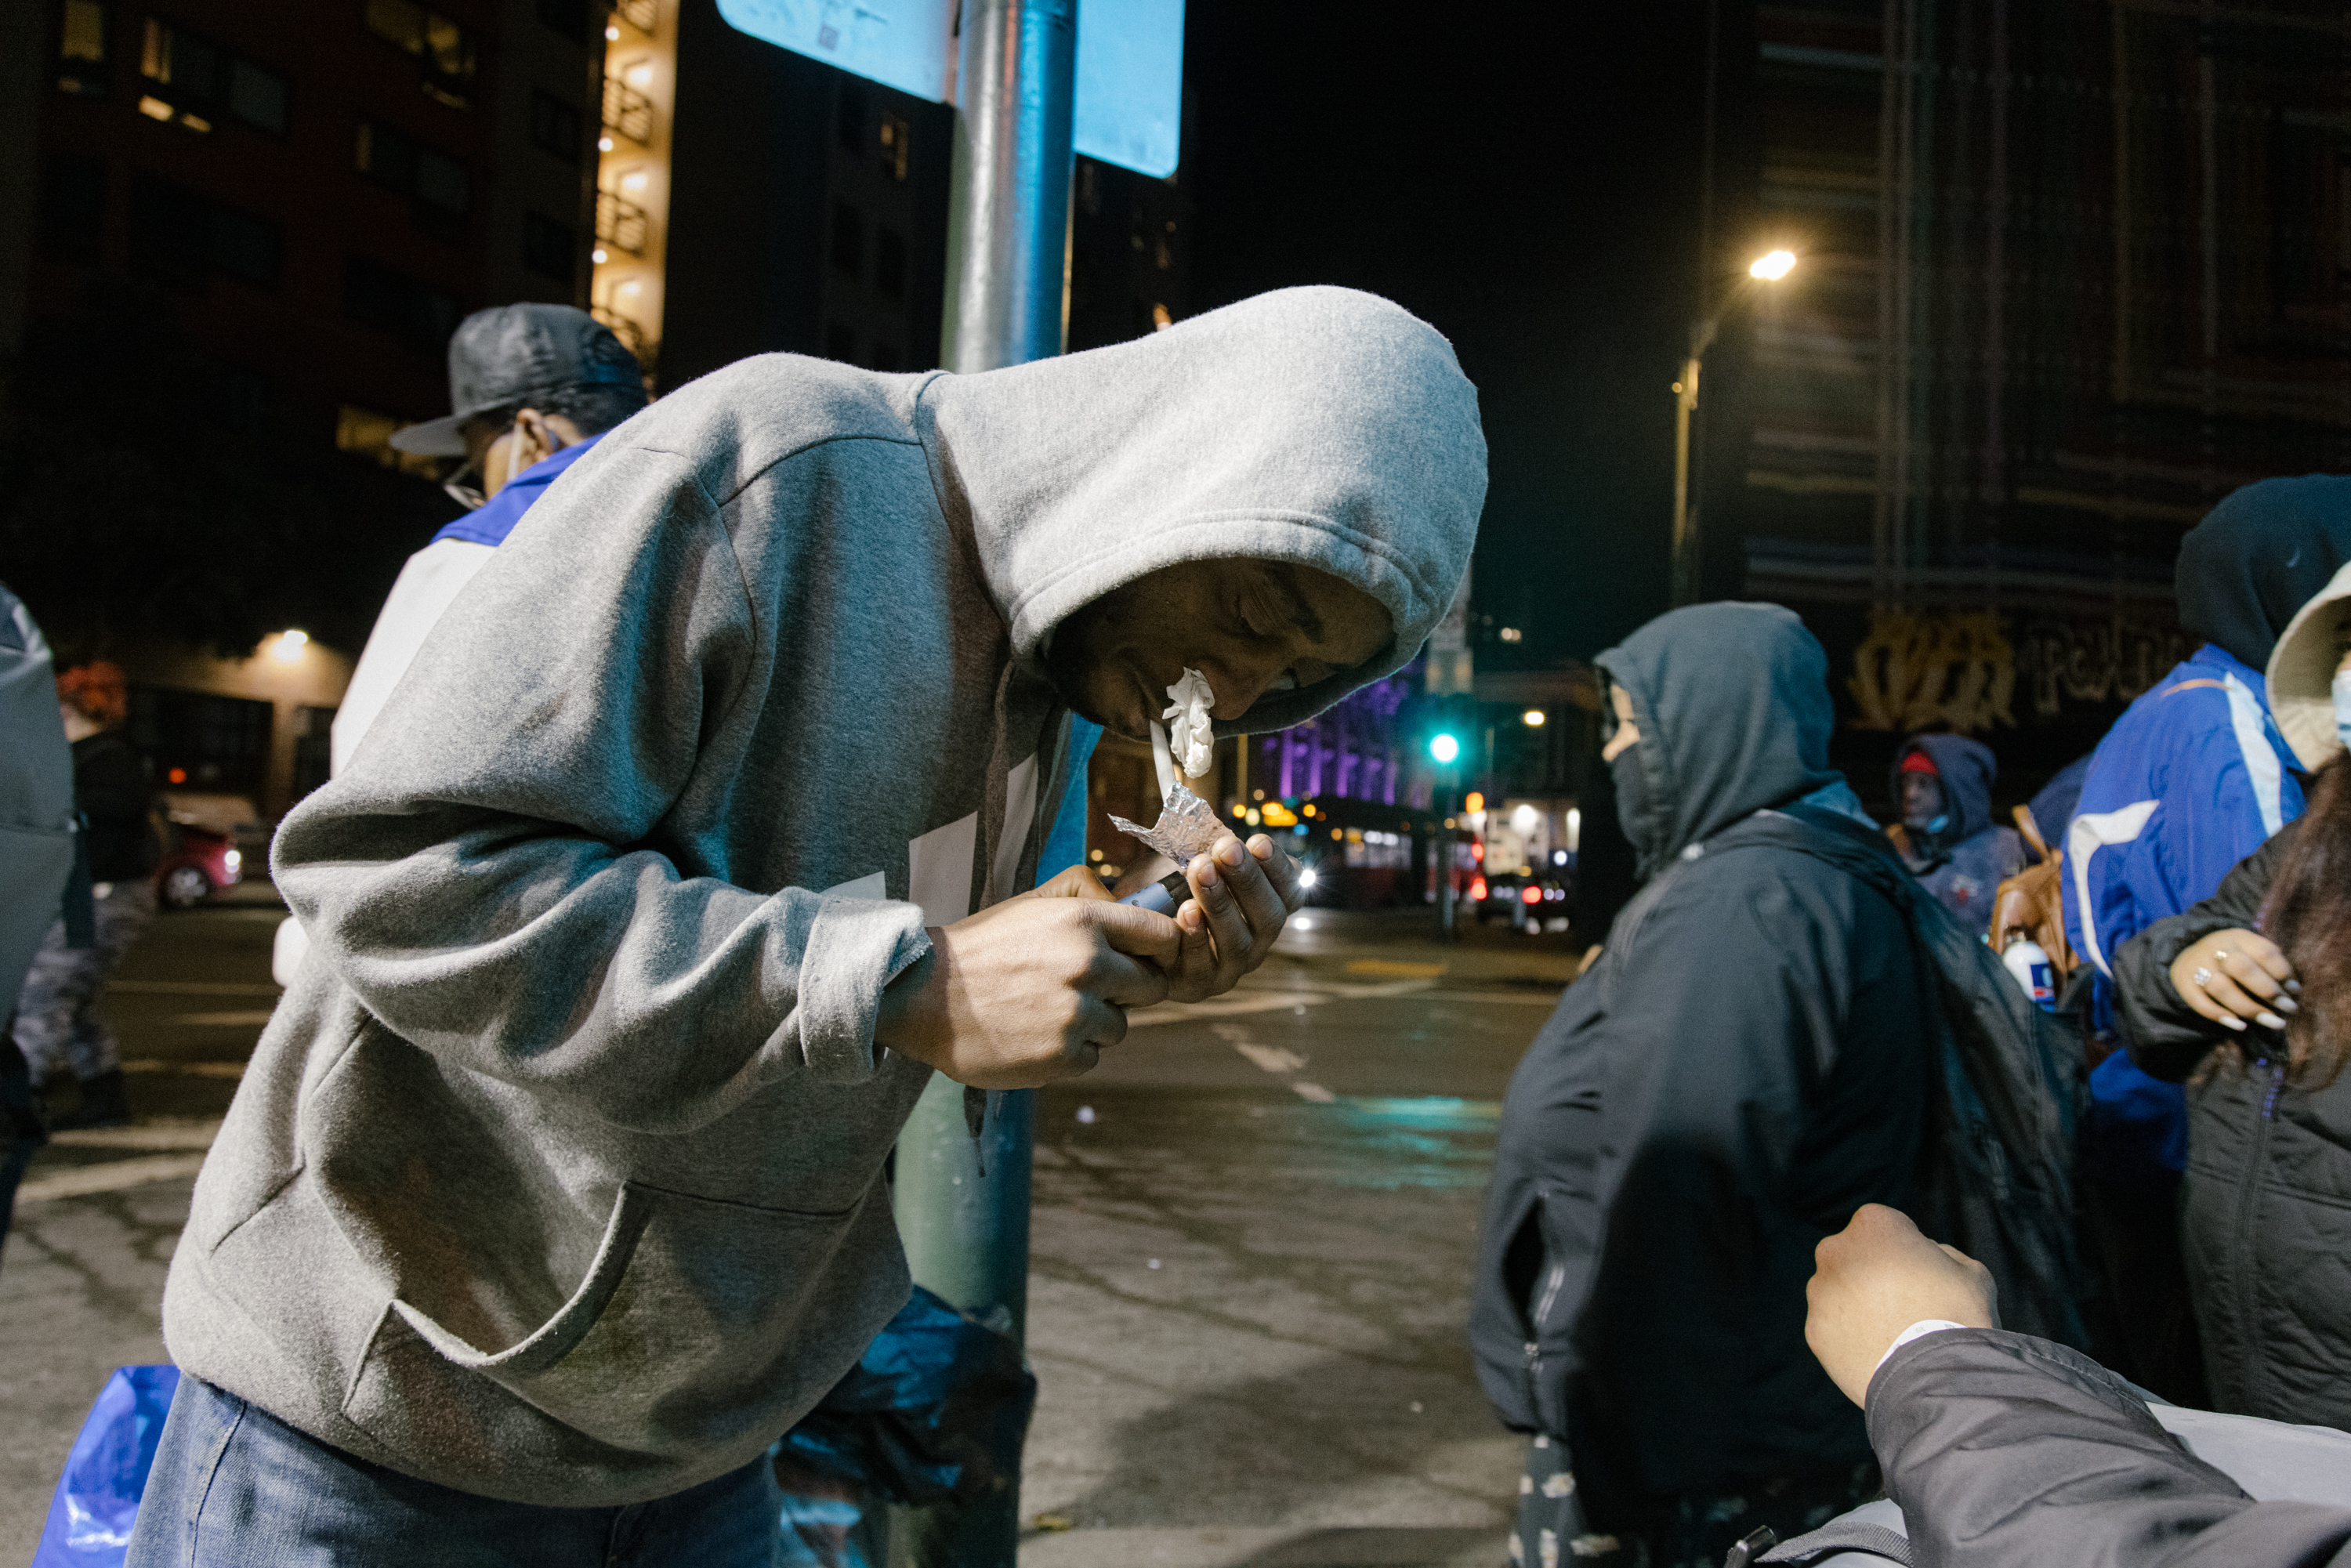 A person in a hoodie is lighting a pipe on a city street at night, surrounded by others in winter attire.